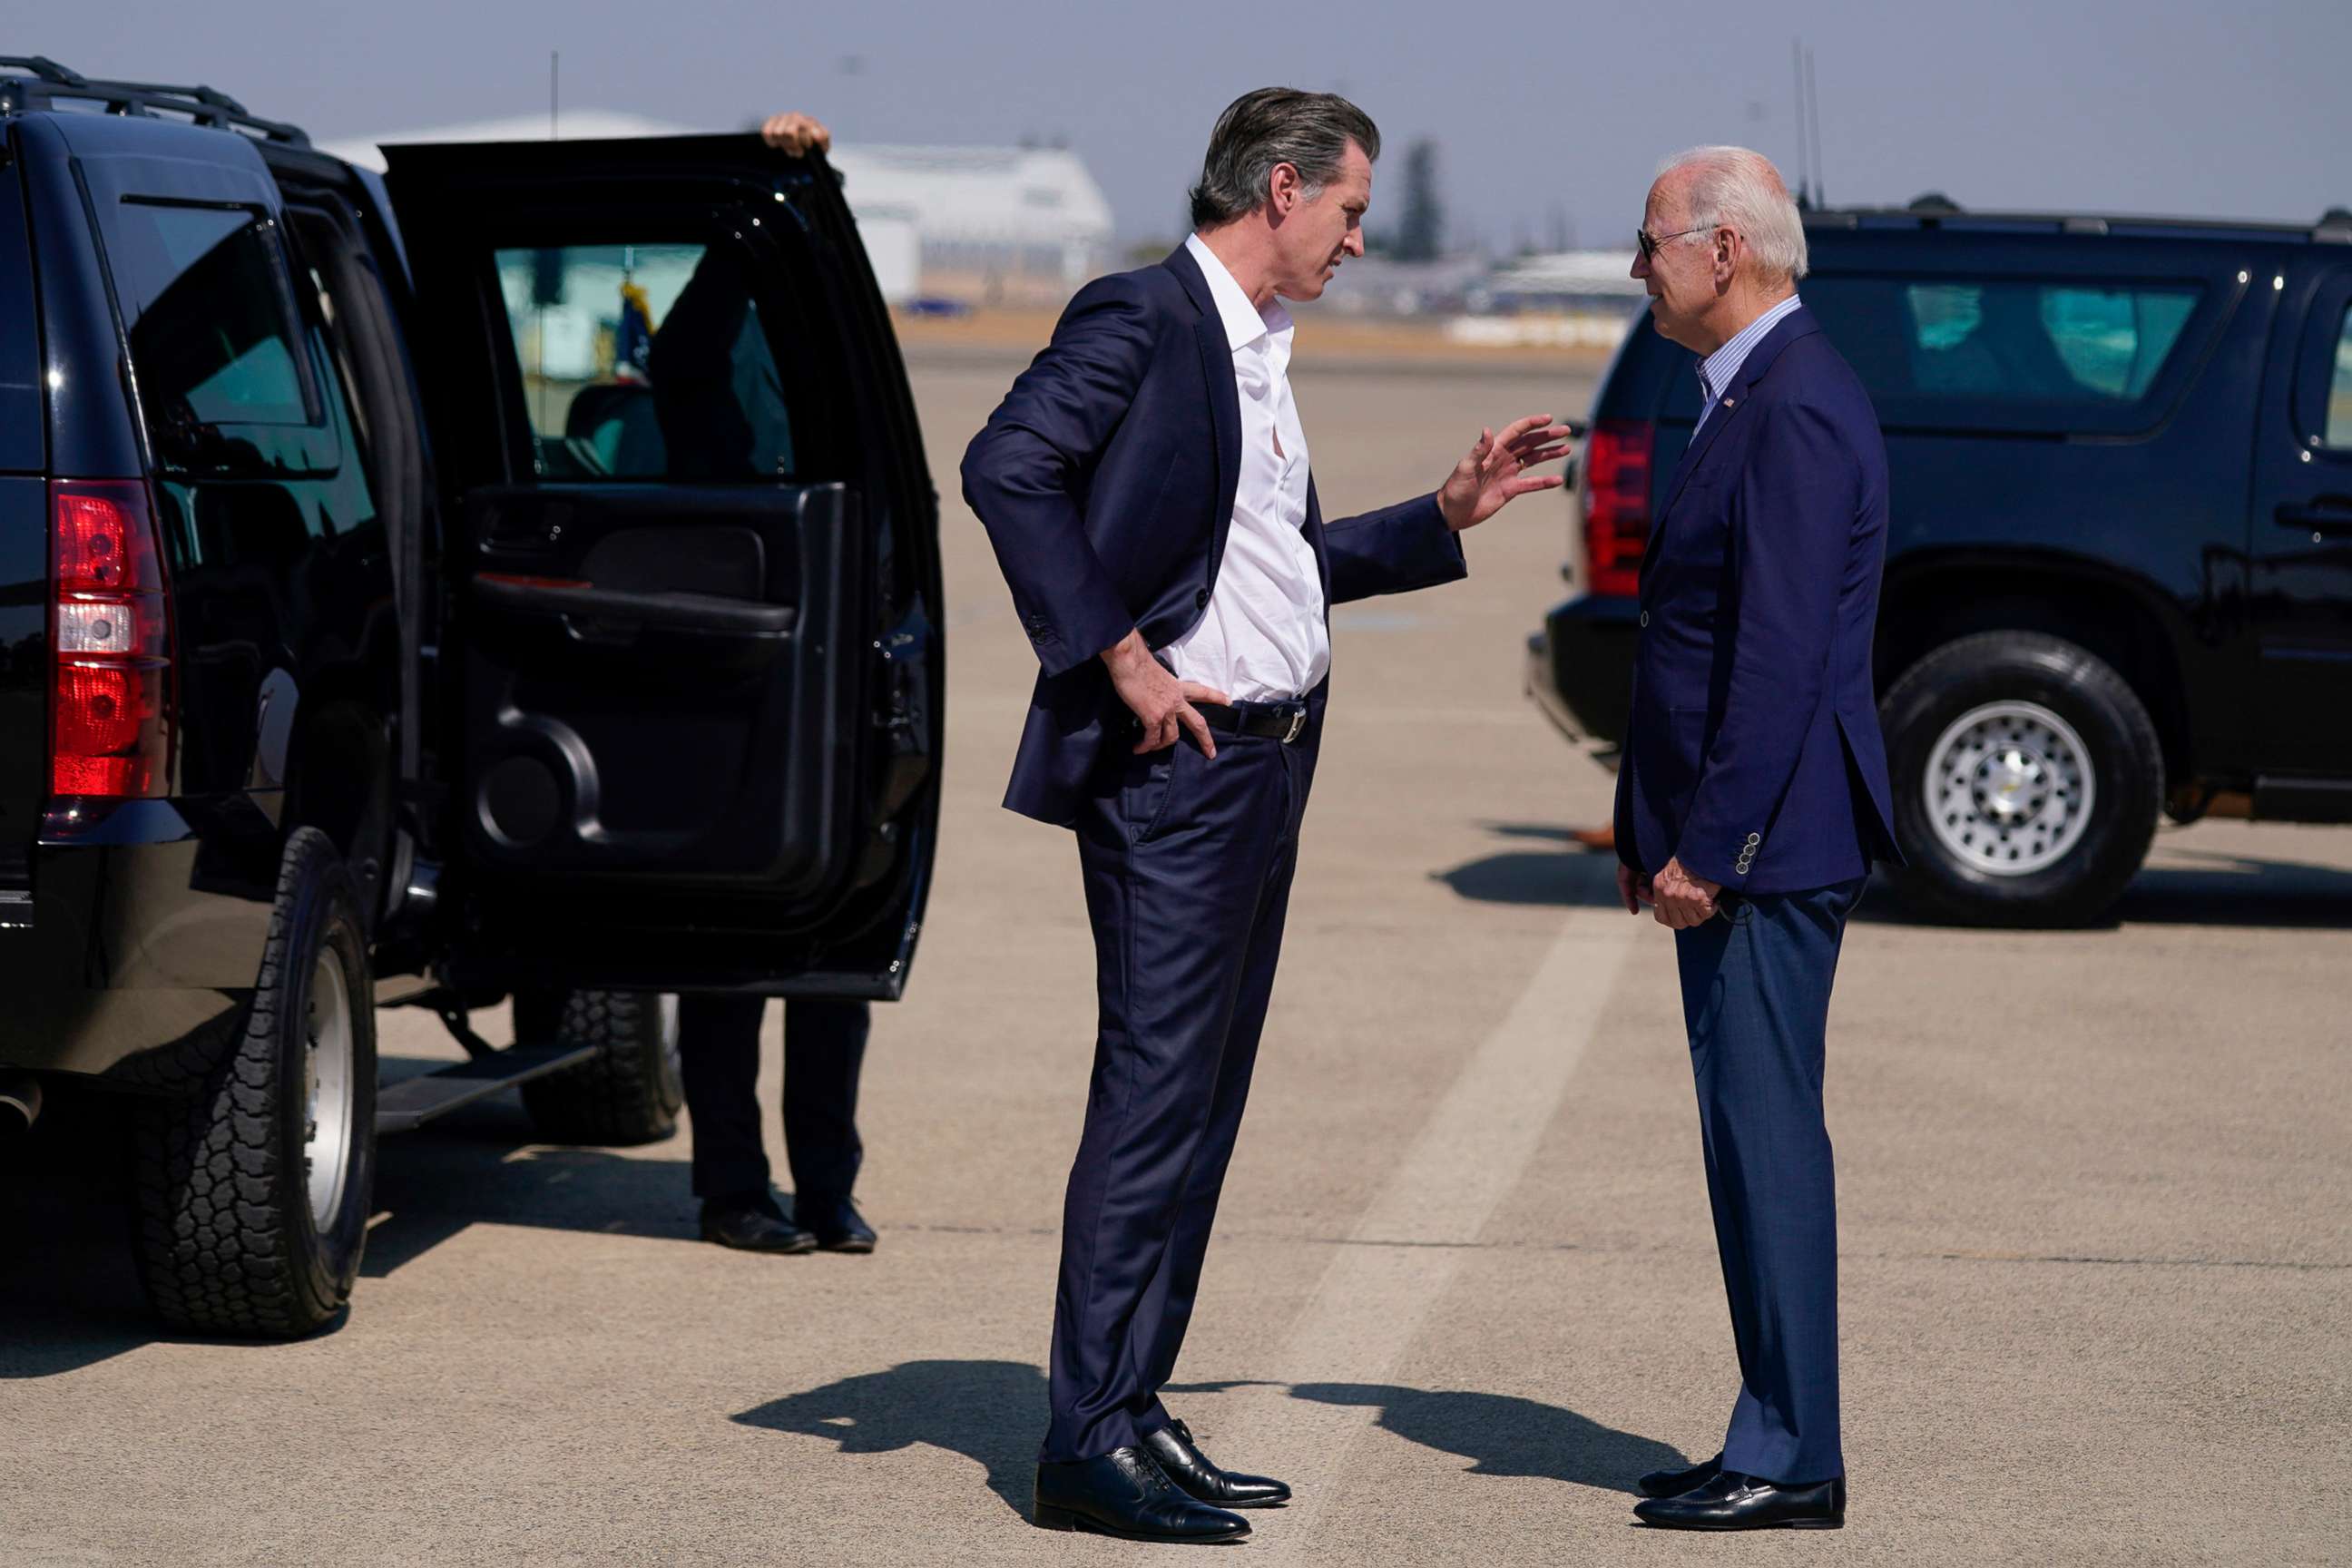 PHOTO: President Joe Biden talks with California Gov. Gavin Newsom as he arrives at Mather Airport on Air Force One, Sept. 13, 2021, in Mather, Calif.